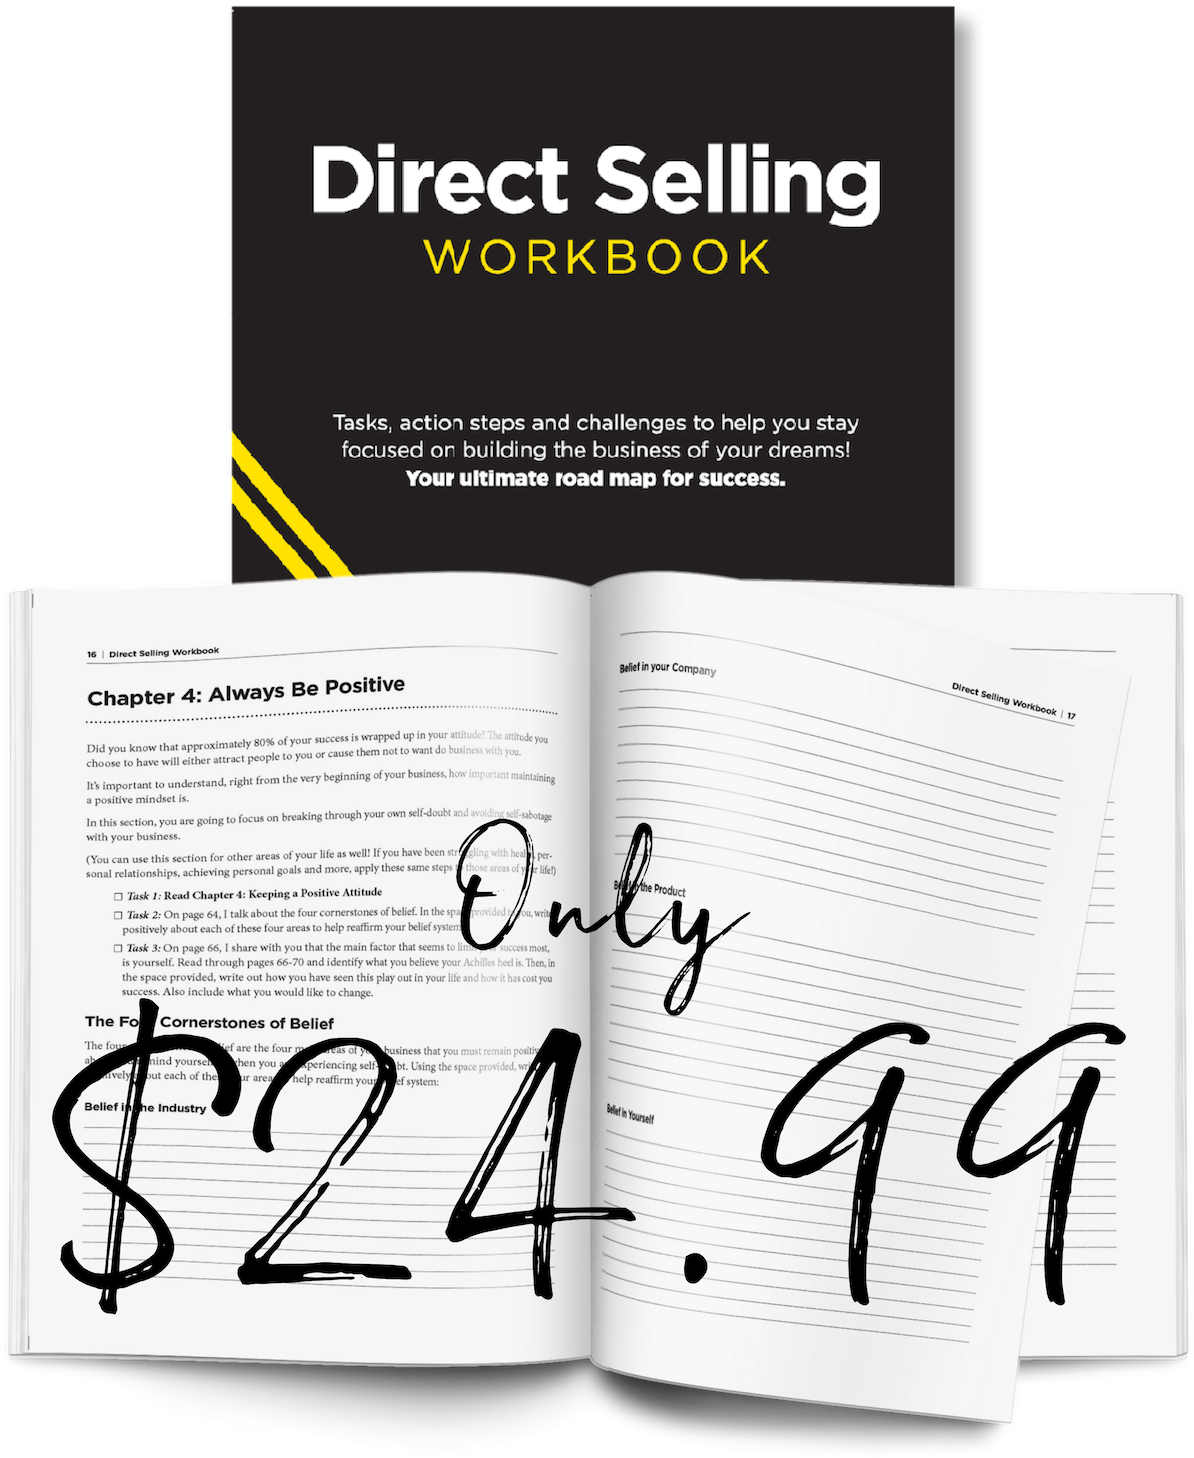 Direct Selling Workbook Promotion